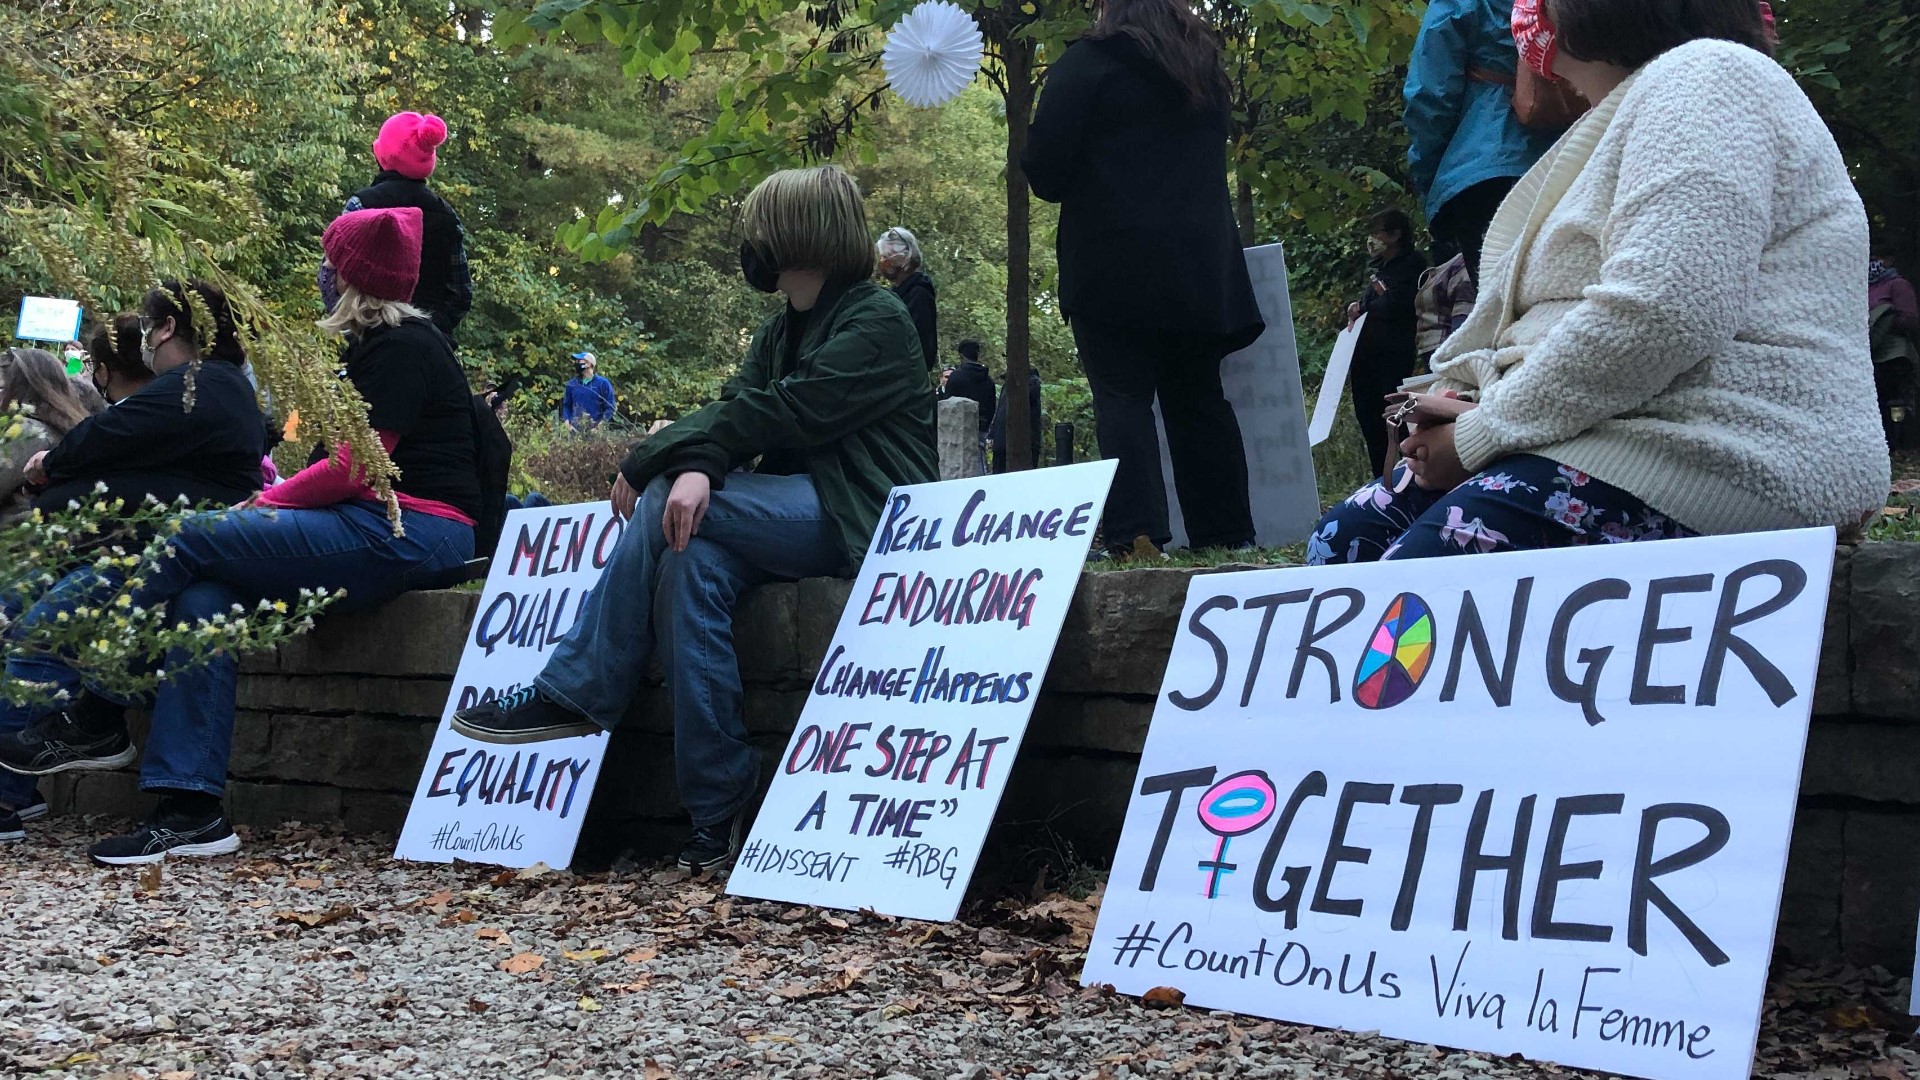 The group Viva La Femme held an event at Cherokee Park, which included art and connecting with one another.